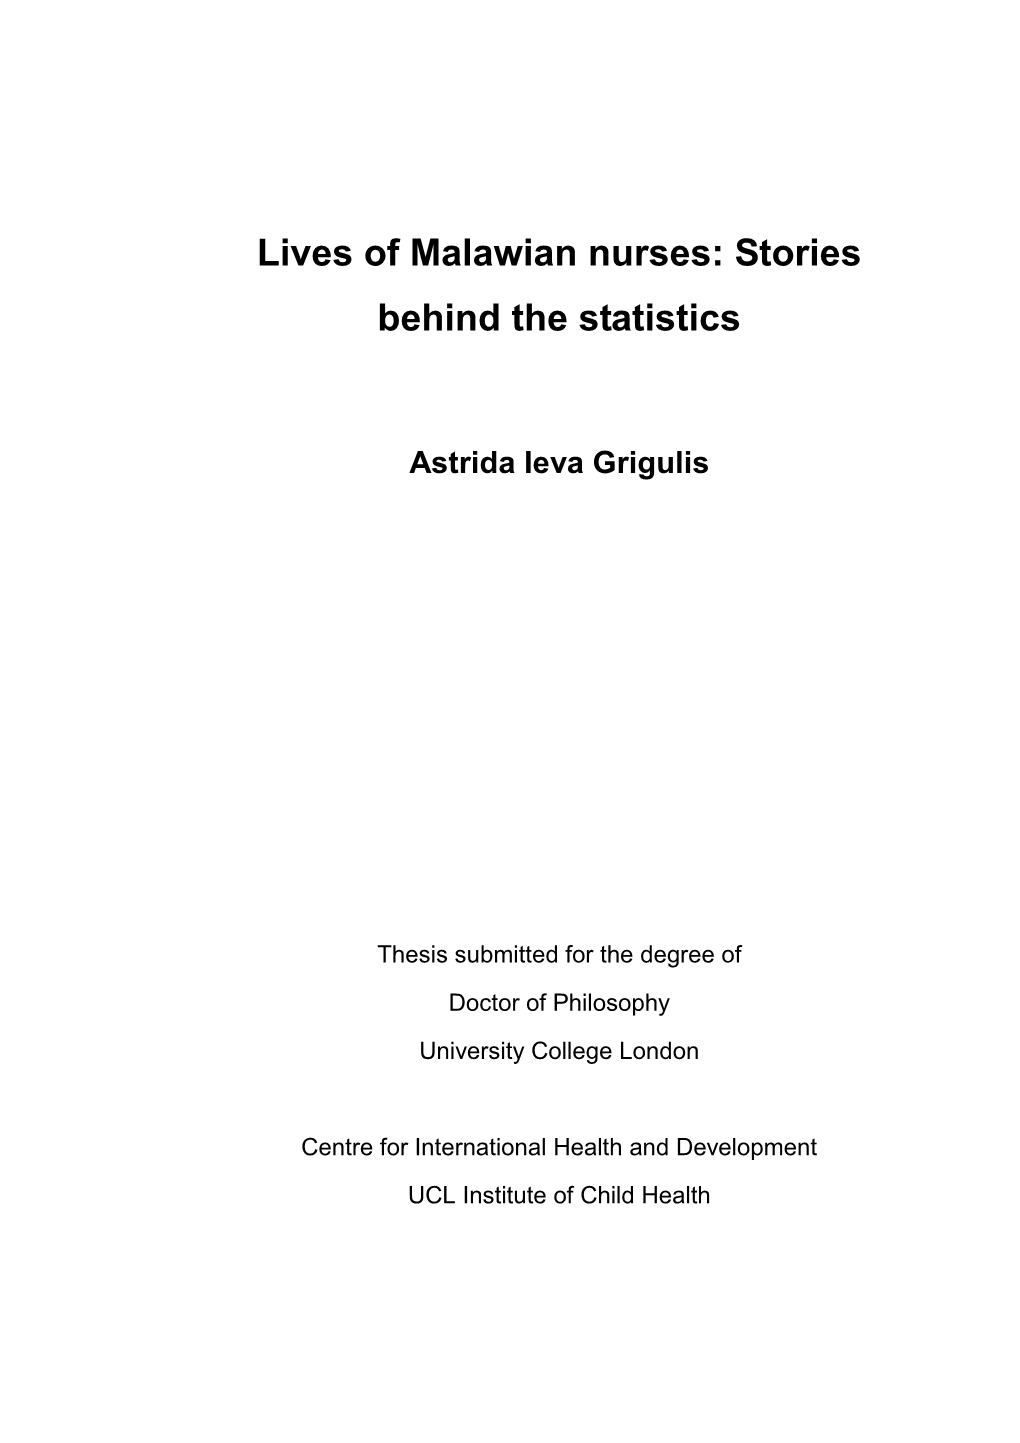 Lives of Malawian Nurses: Stories Behind the Statistics